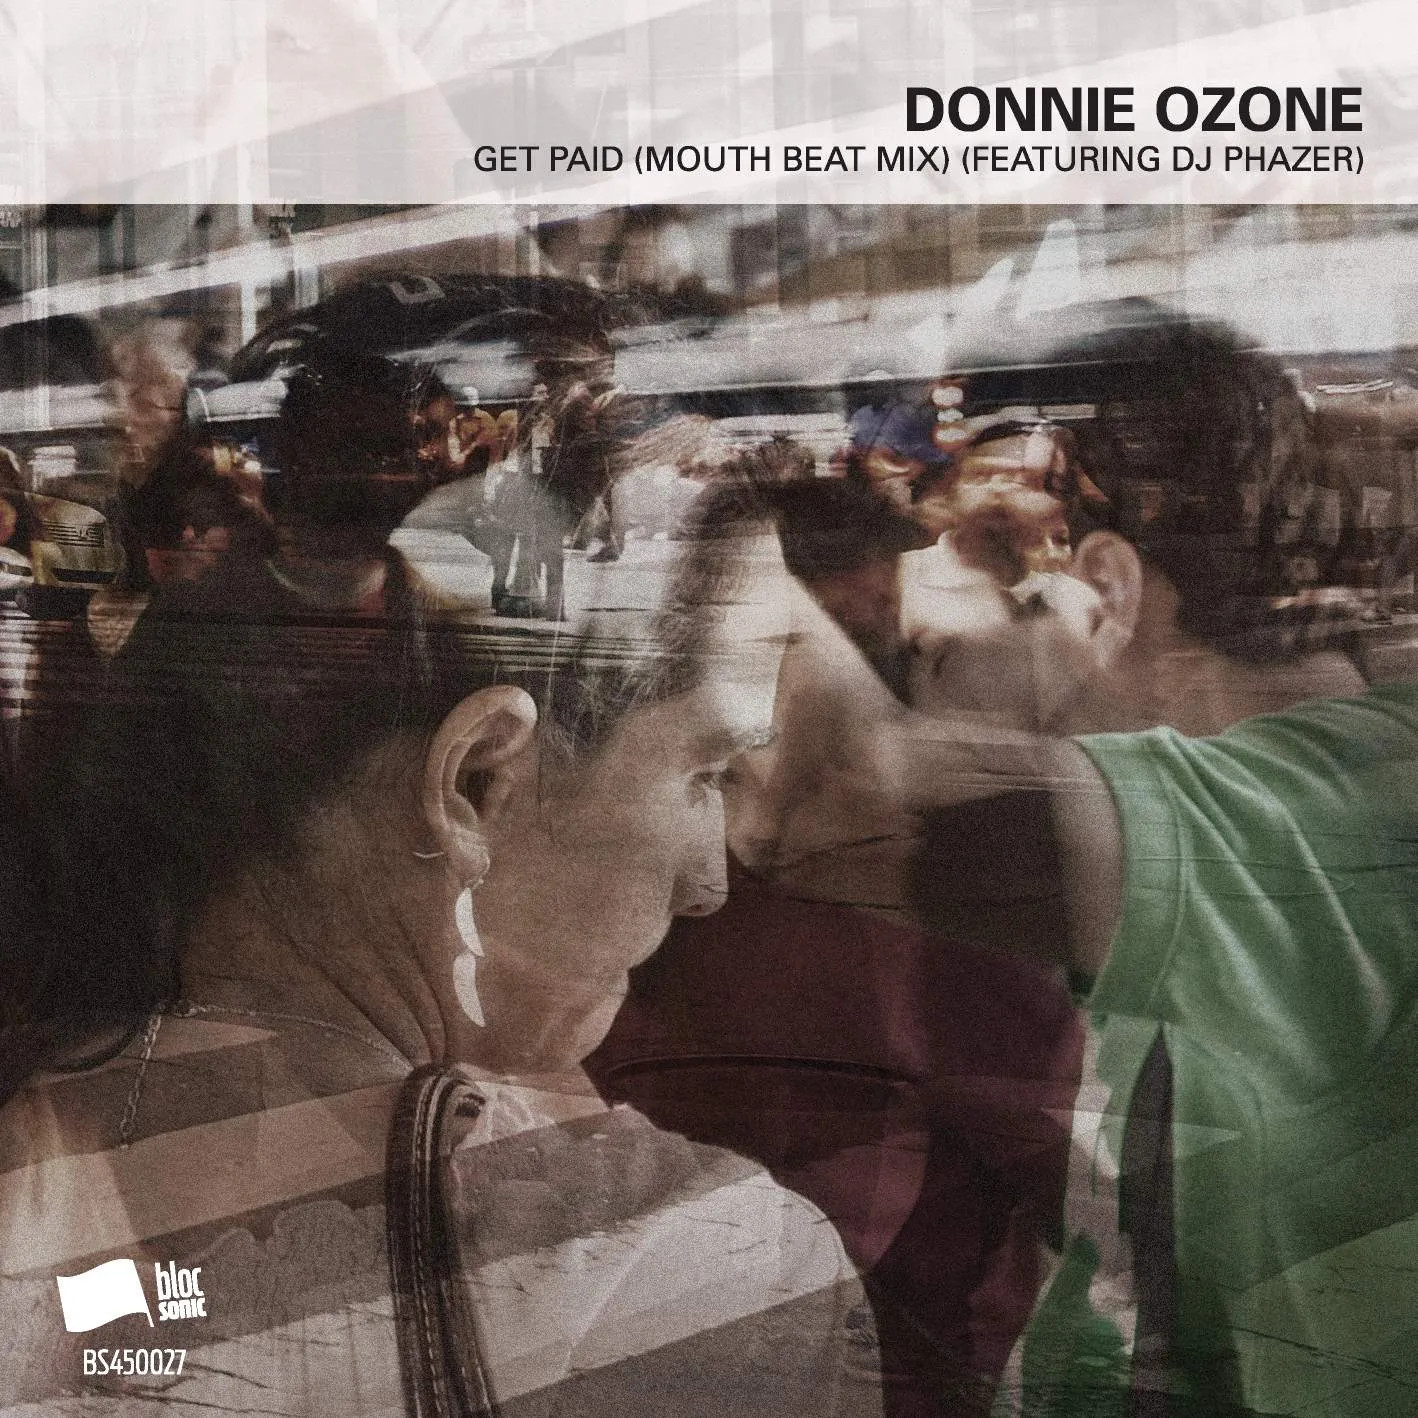 Donnie Ozone's Get Paid